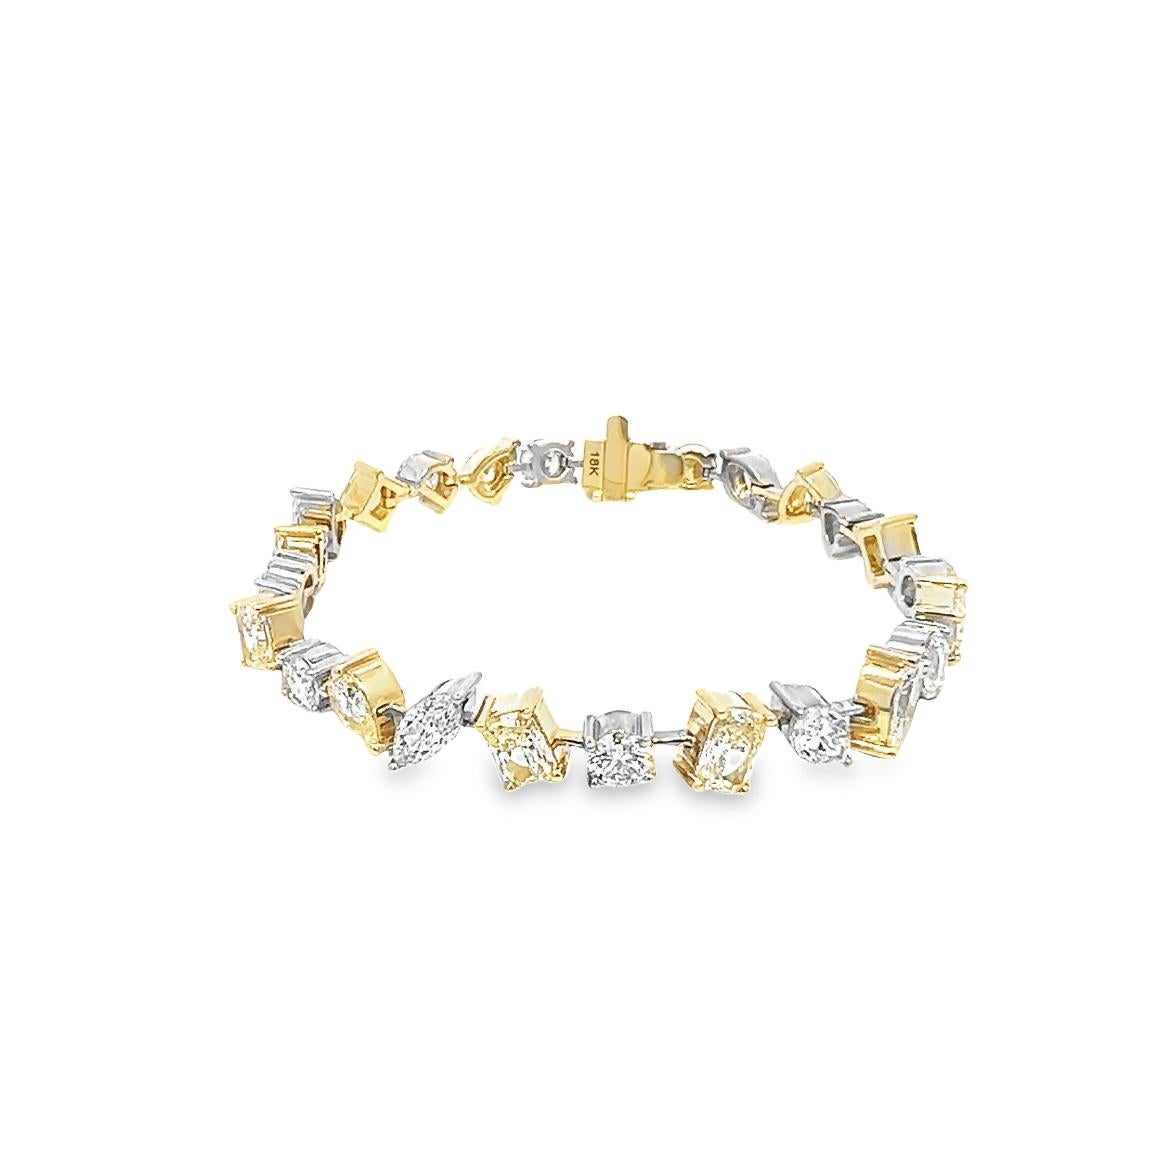 Introducing a set of exquisite handmade bracelets made from 18K yellow and 18K white gold, embedded with multiple-shaped diamonds that total 13.12 carats. This unique piece boasts 13 fancy yellow diamonds (fancy light-intense), along with 12 regular